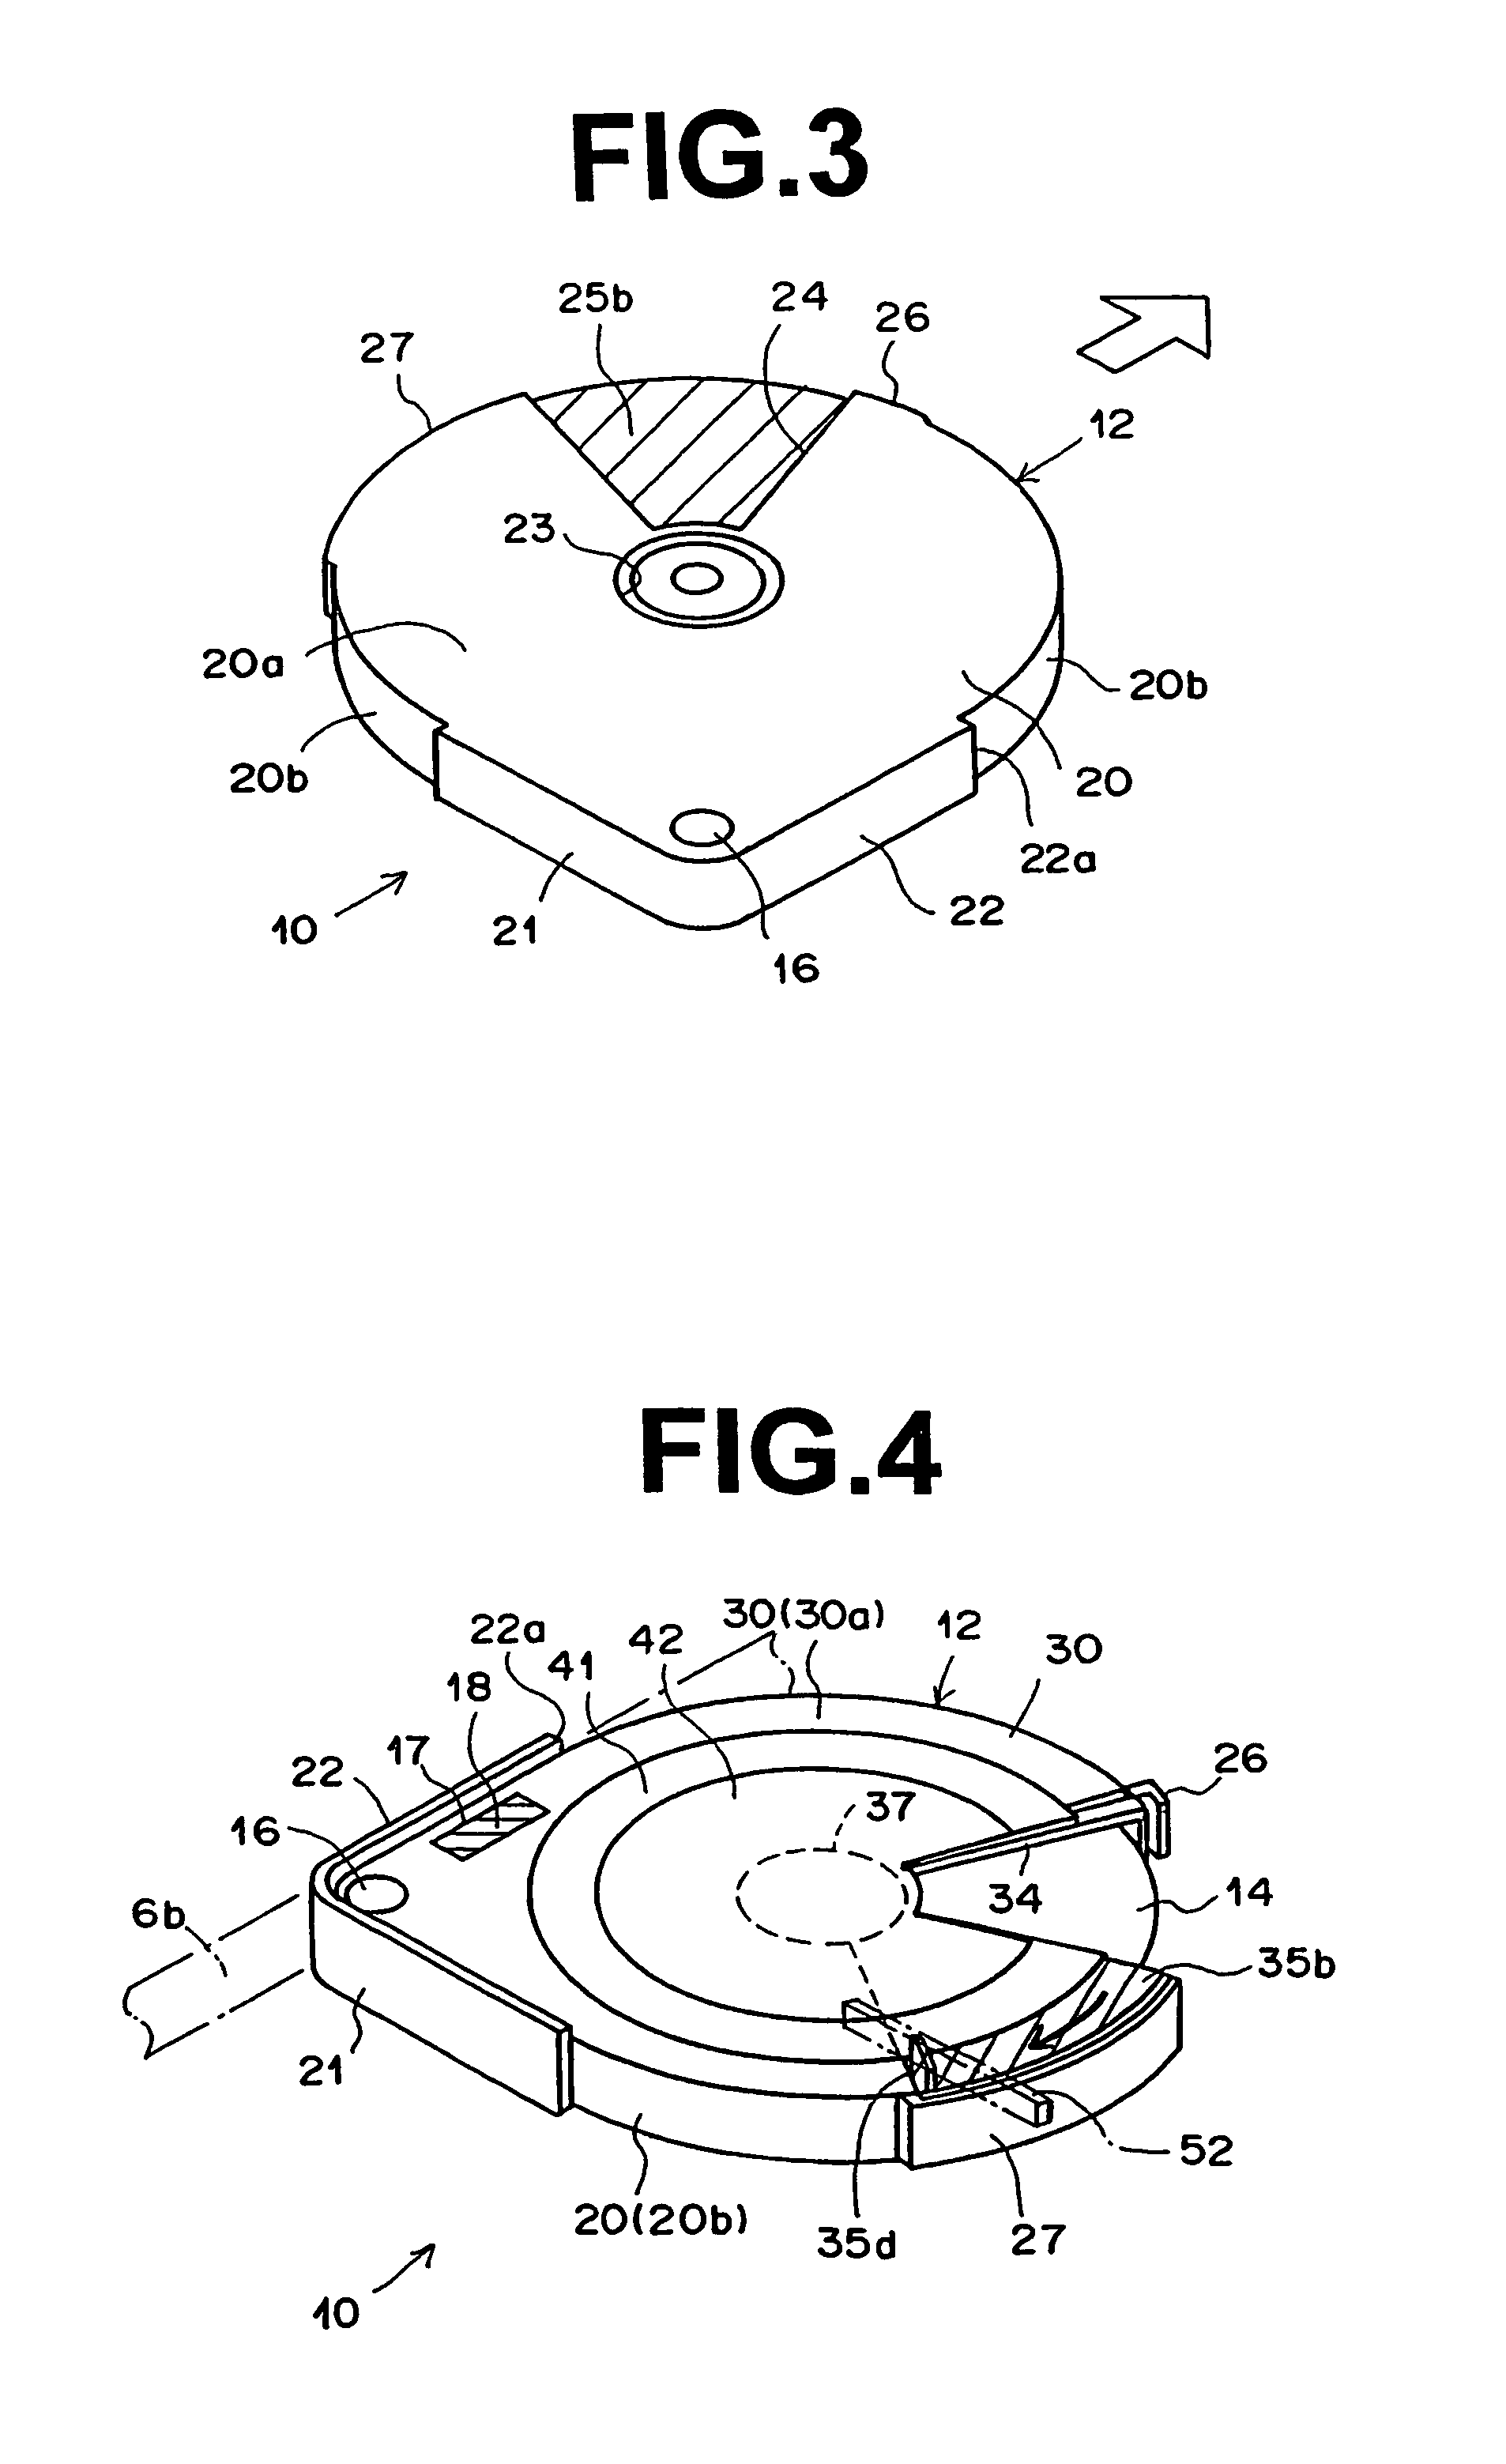 Magnetic disk cartridge with housing composed of circular ARC and straight lines normal to each other